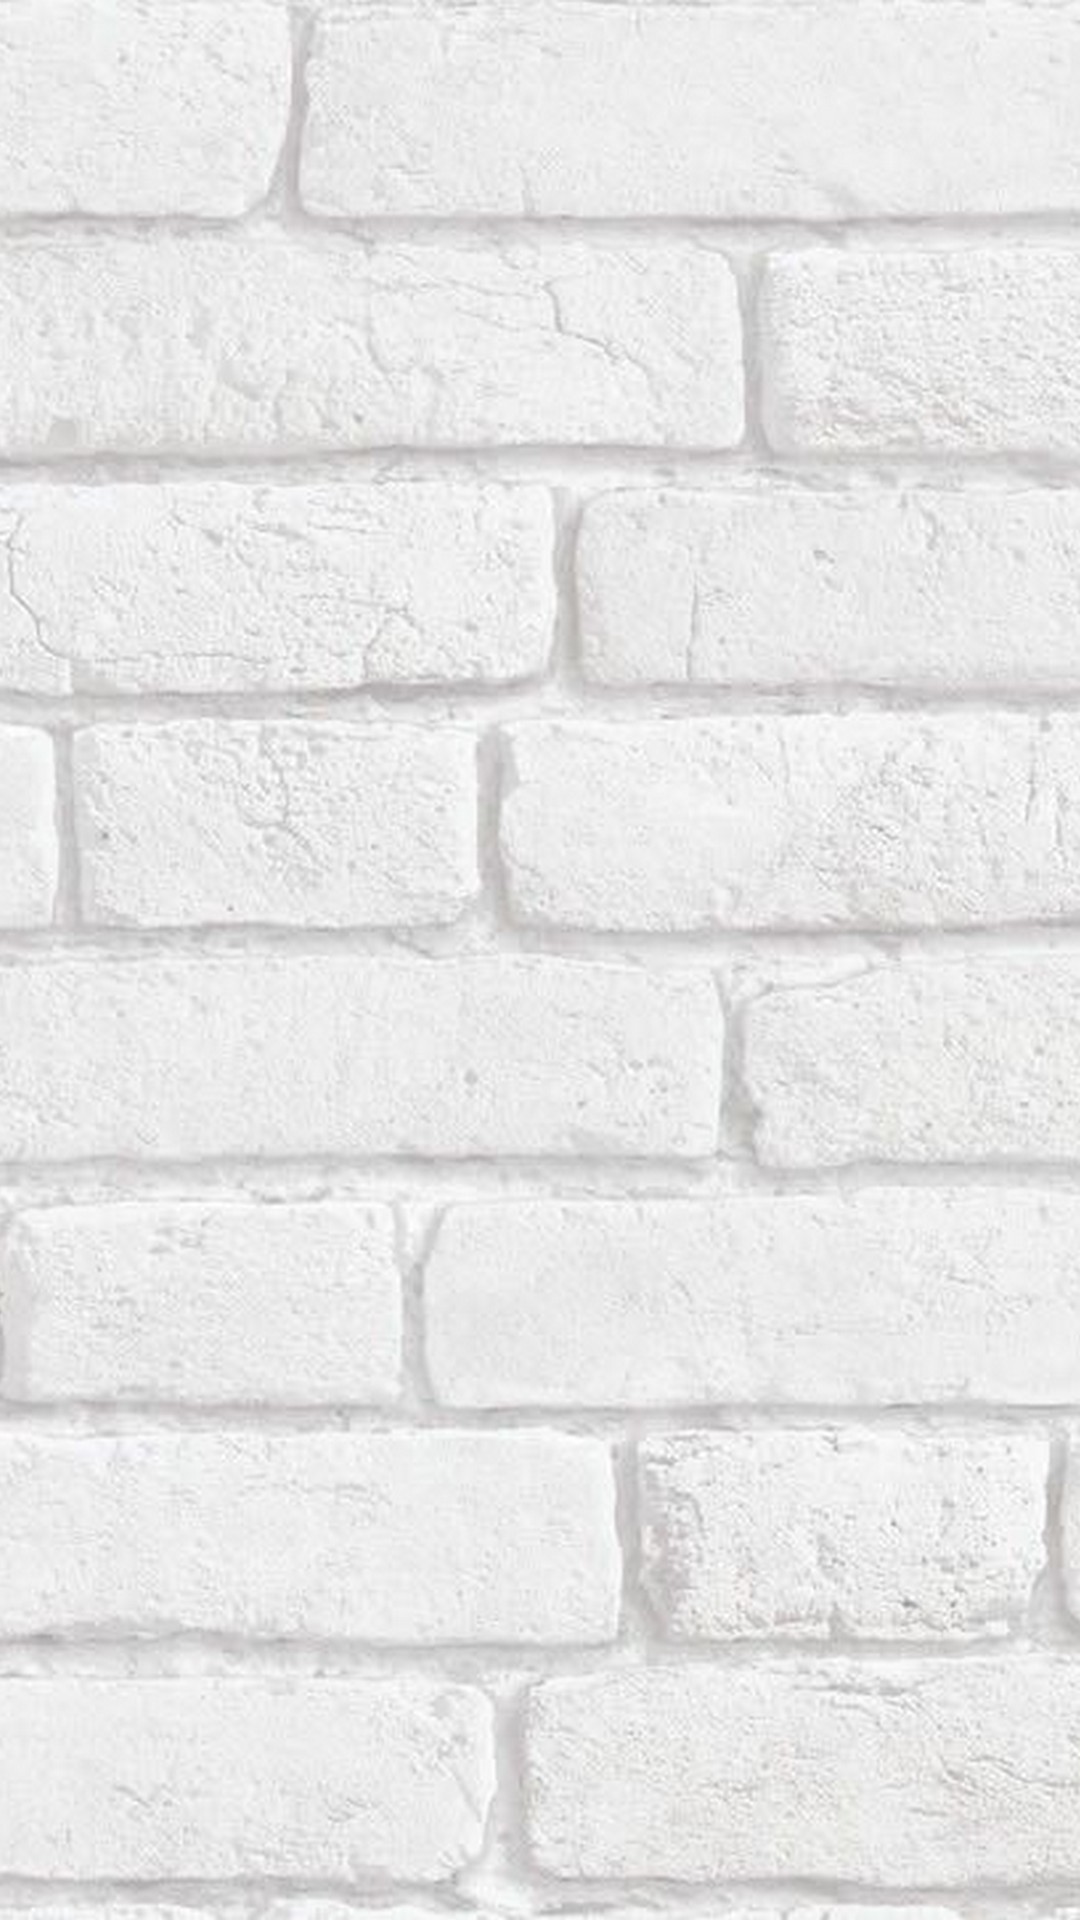 Brick Wallpaper For Android With high-resolution 1080X1920 pixel. You can use this wallpaper for your Android backgrounds, Tablet, Samsung Screensavers, Mobile Phone Lock Screen and another Smartphones device